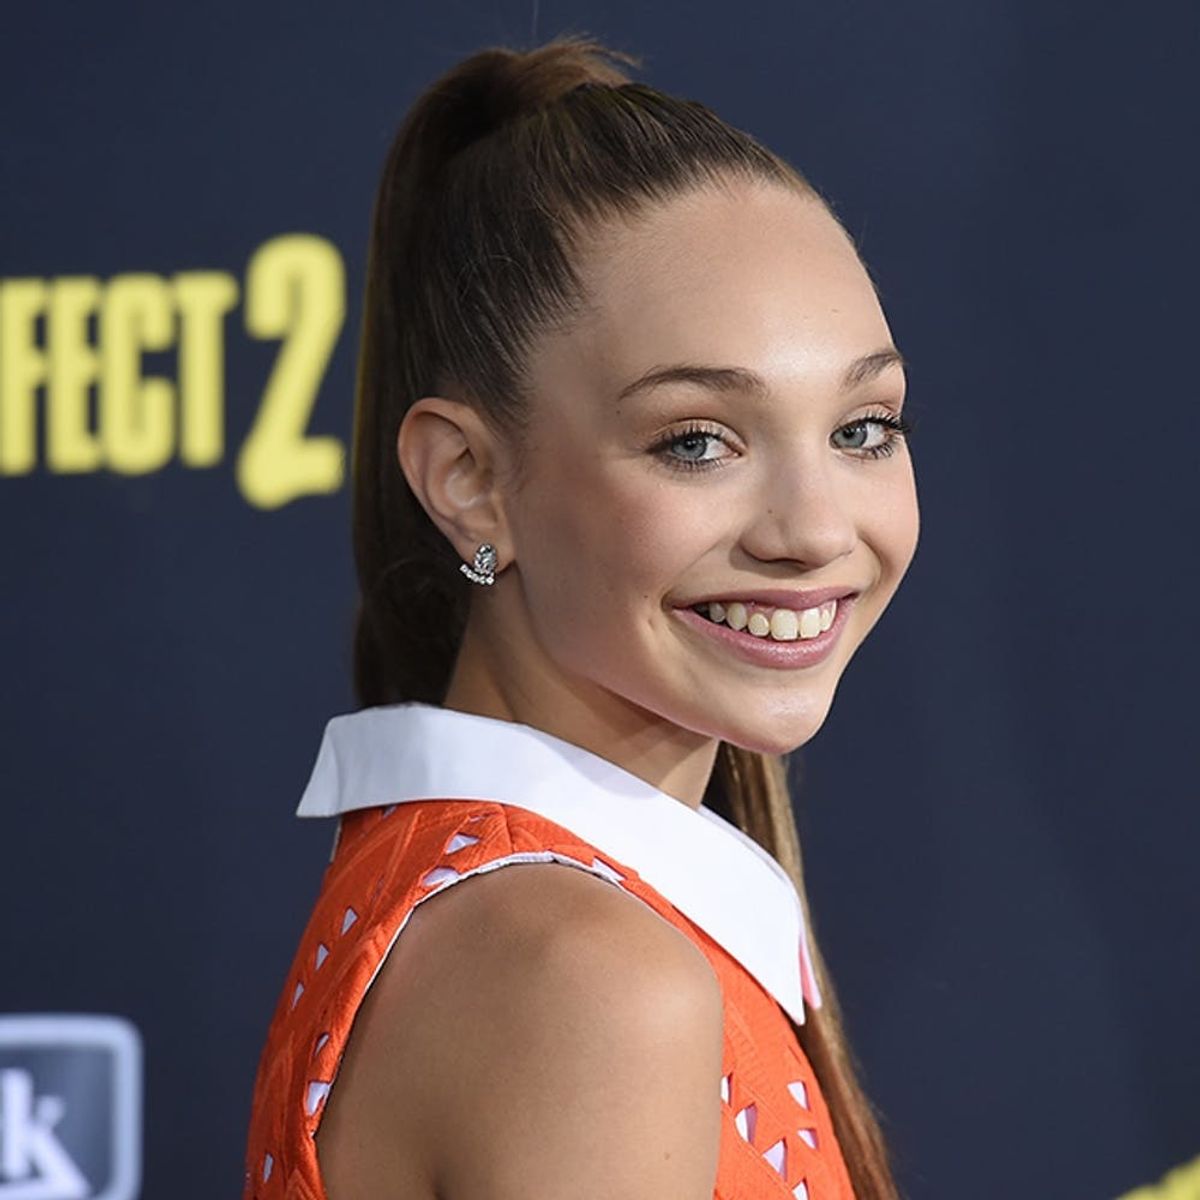 Maddie Ziegler Just Released an App for All You Dancing Queens